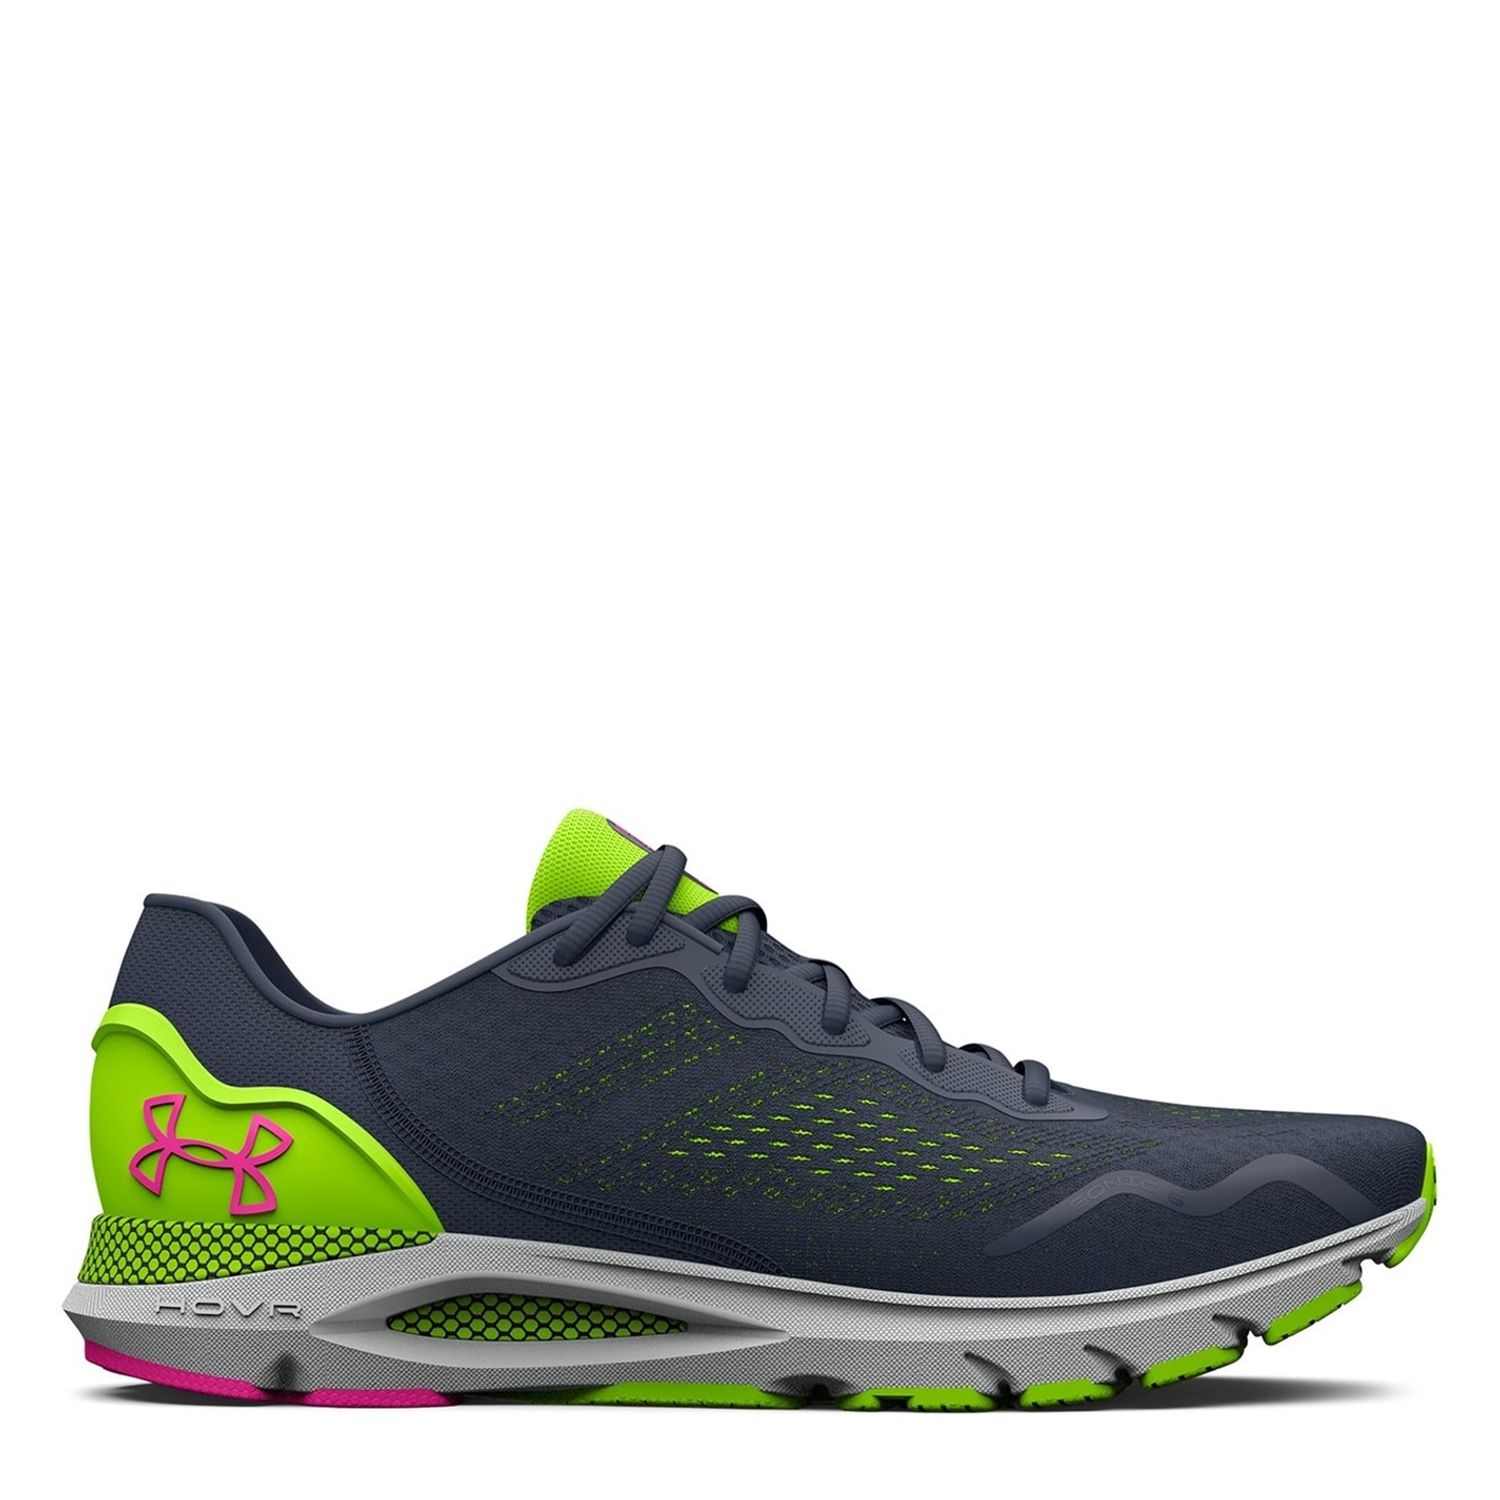 Under Armour Hovr Sonic 6 Running Shoes Men's